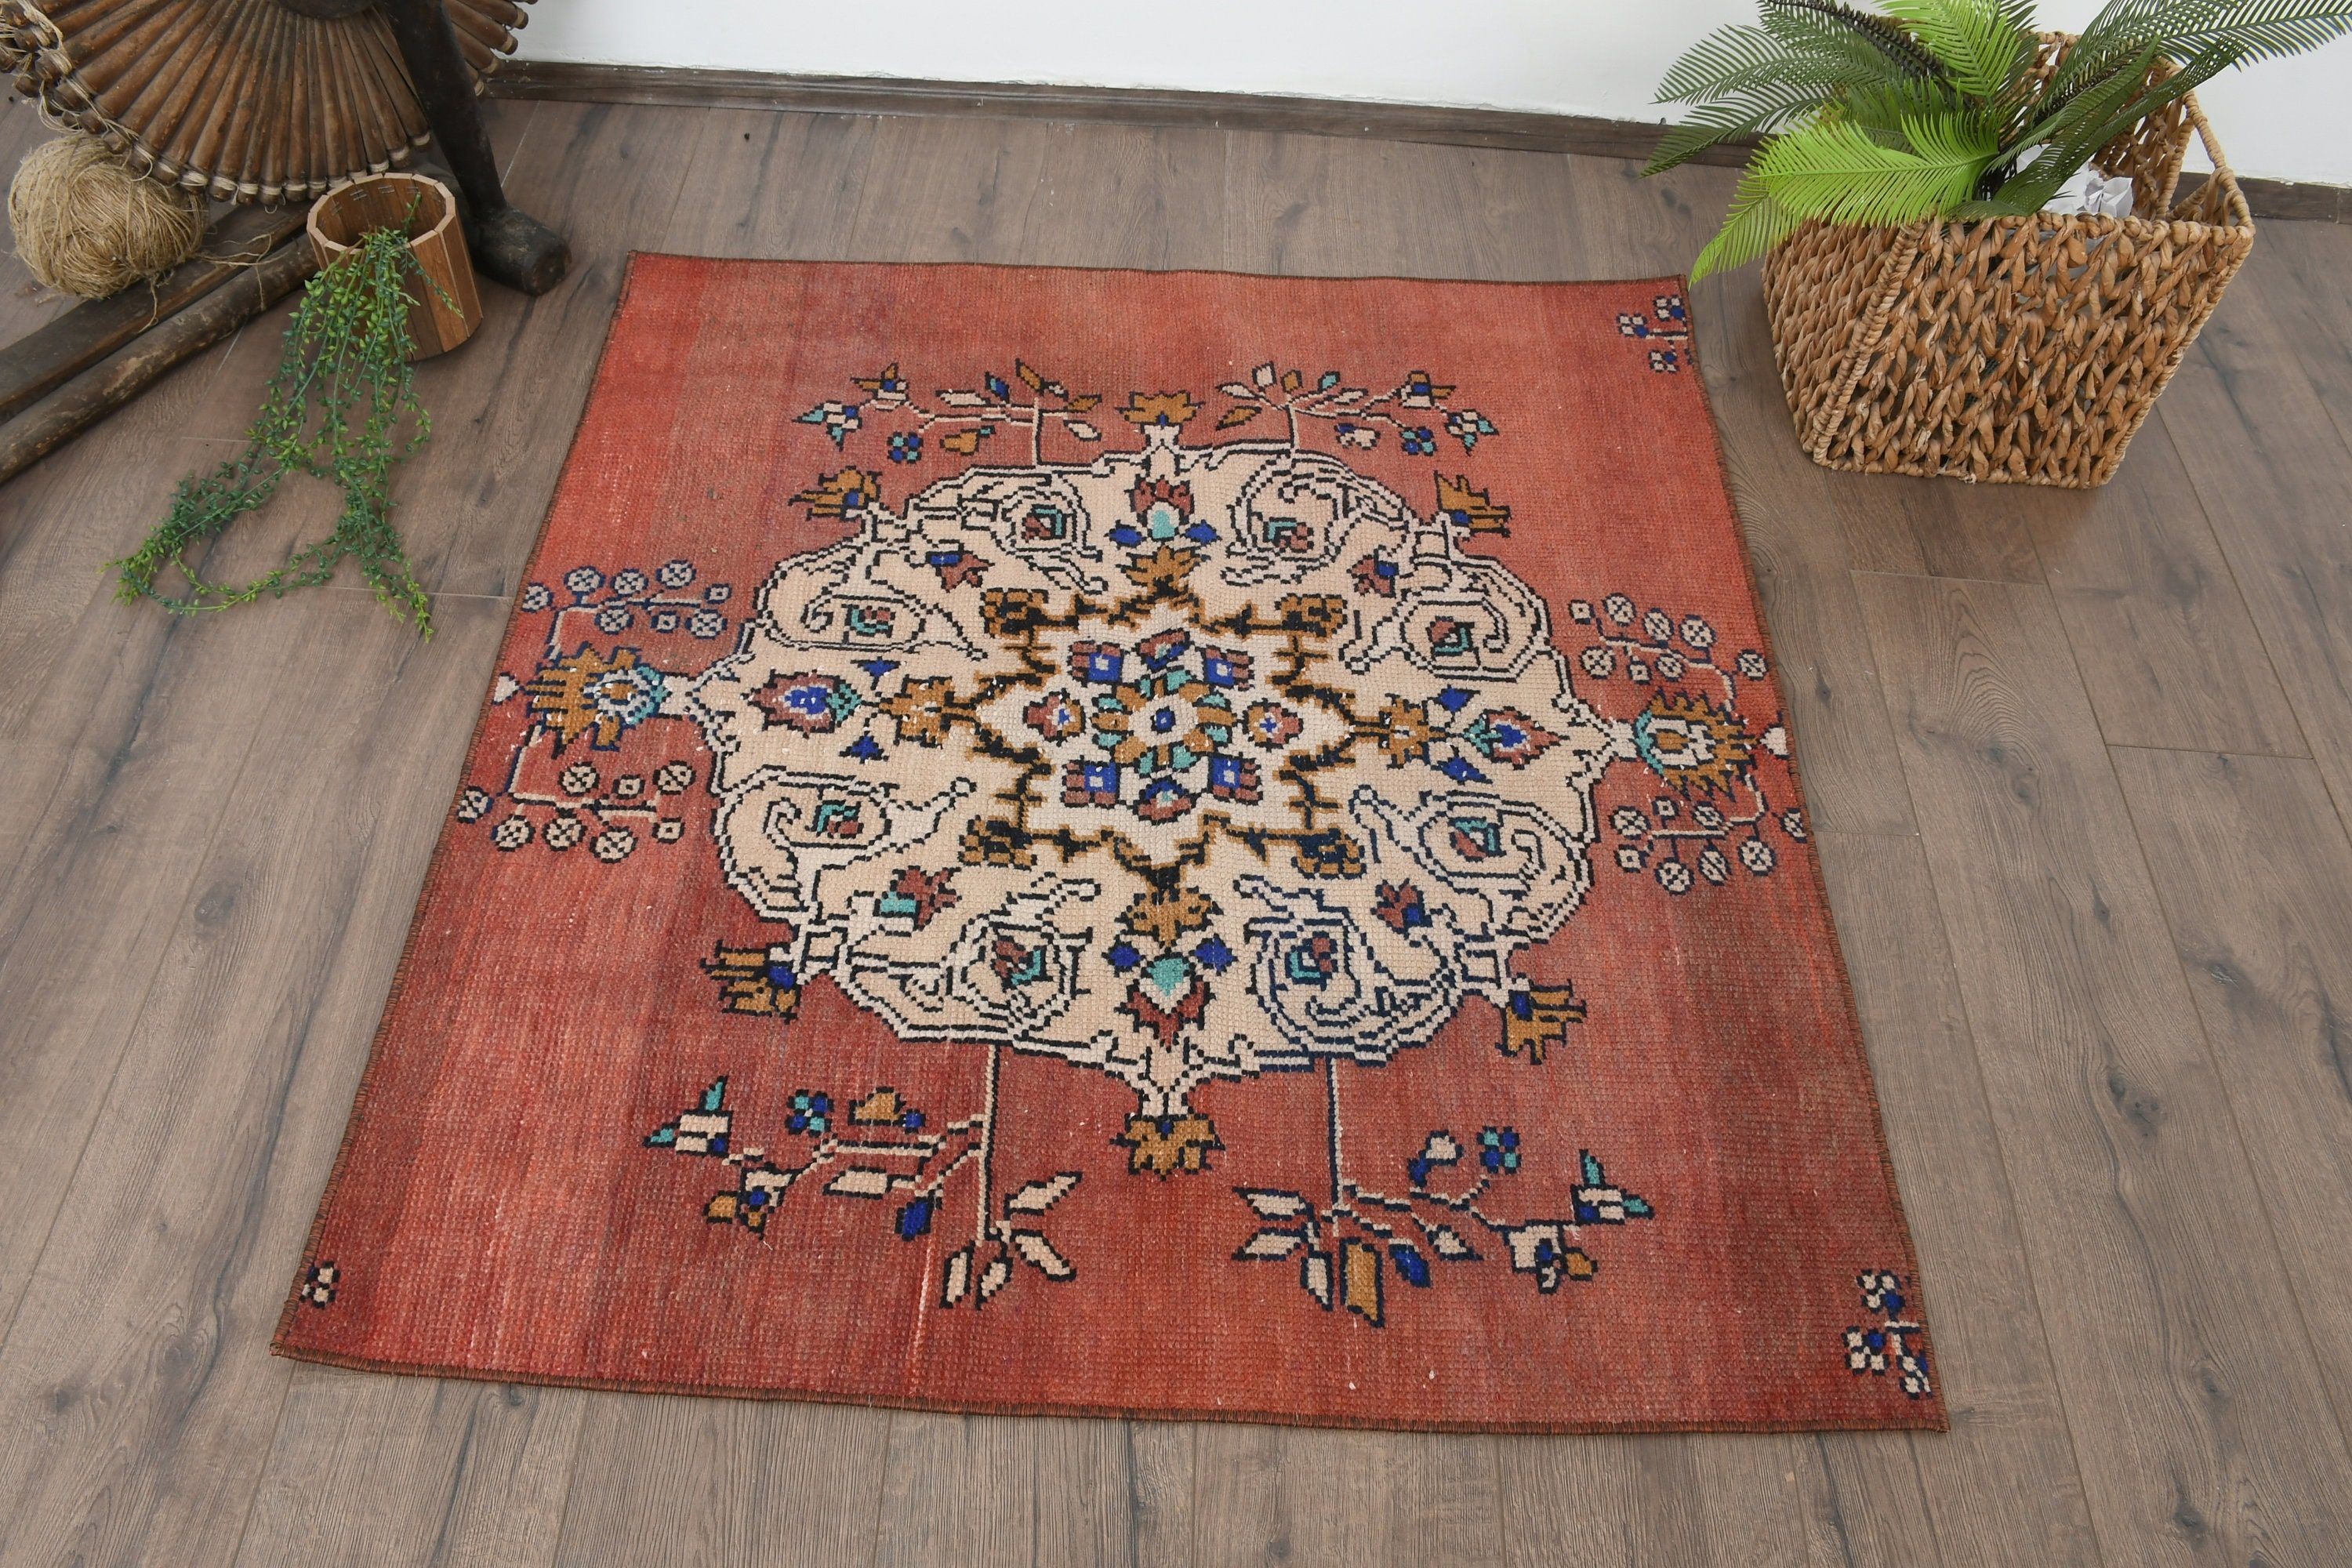 Floor Rugs, Beige  3.5x3.8 ft Small Rug, Turkish Rug, Entry Rugs, Oushak Rug, Rugs for Entry, Vintage Rug, Wall Hanging Rug